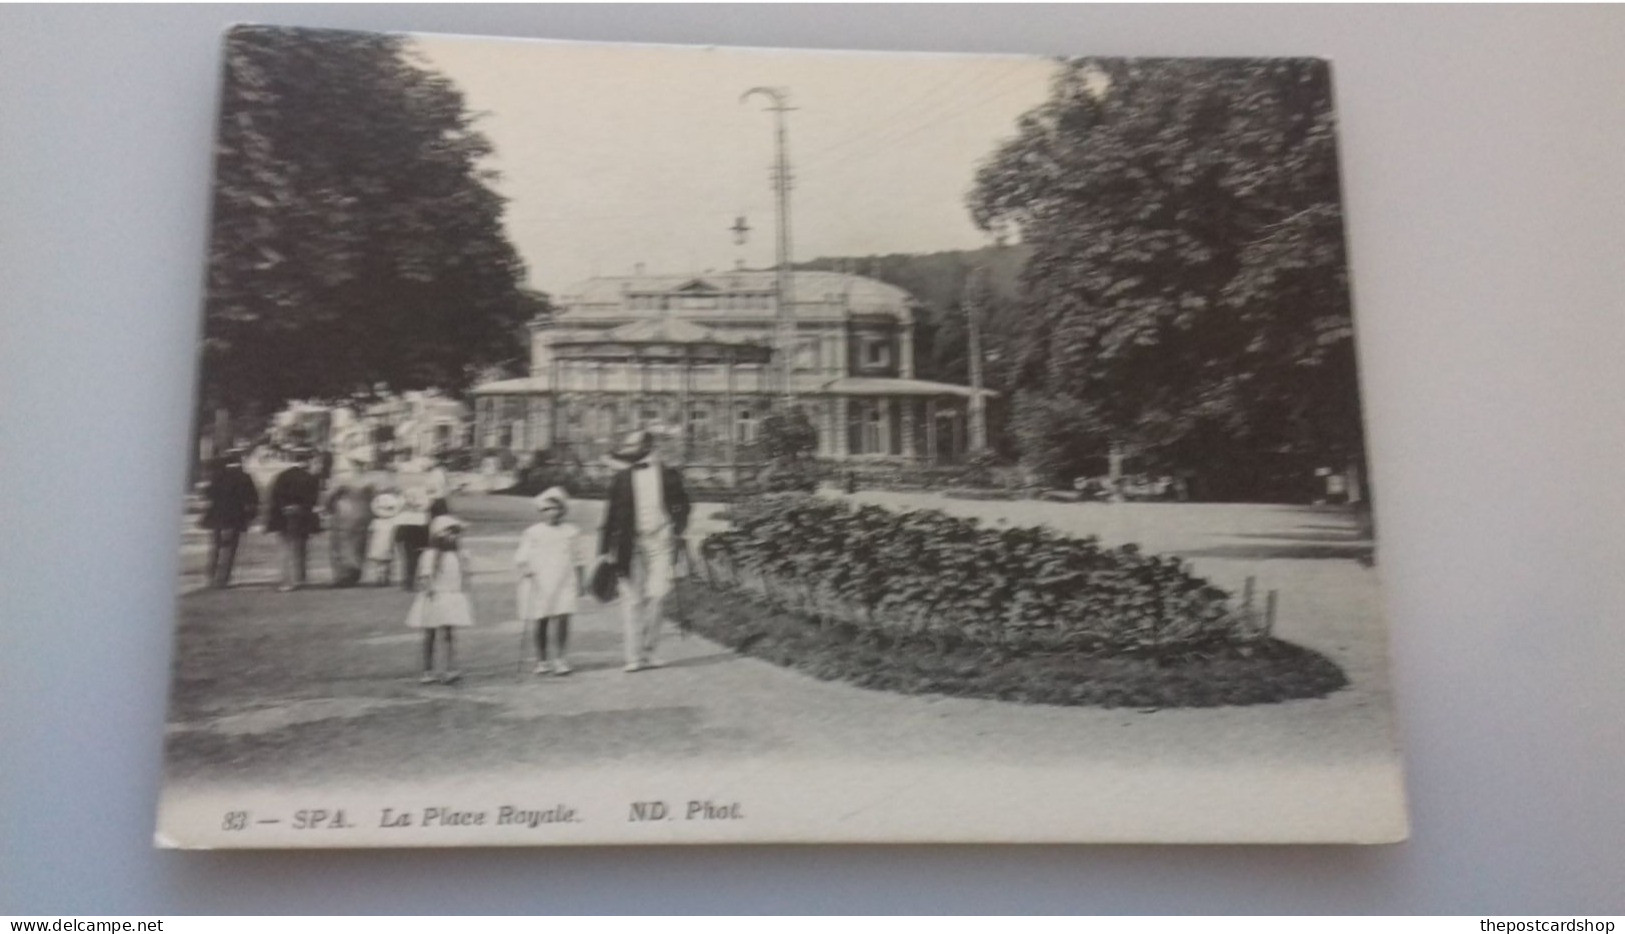 BELGIUM LIEGE SPA LA PLACE ROYALE N° 83 UNUSED NOTE WOMEN REMOVED FROM THE RIGHT BY PUBLISHER ONEofTHOSE SMALLER CARDS - Spa